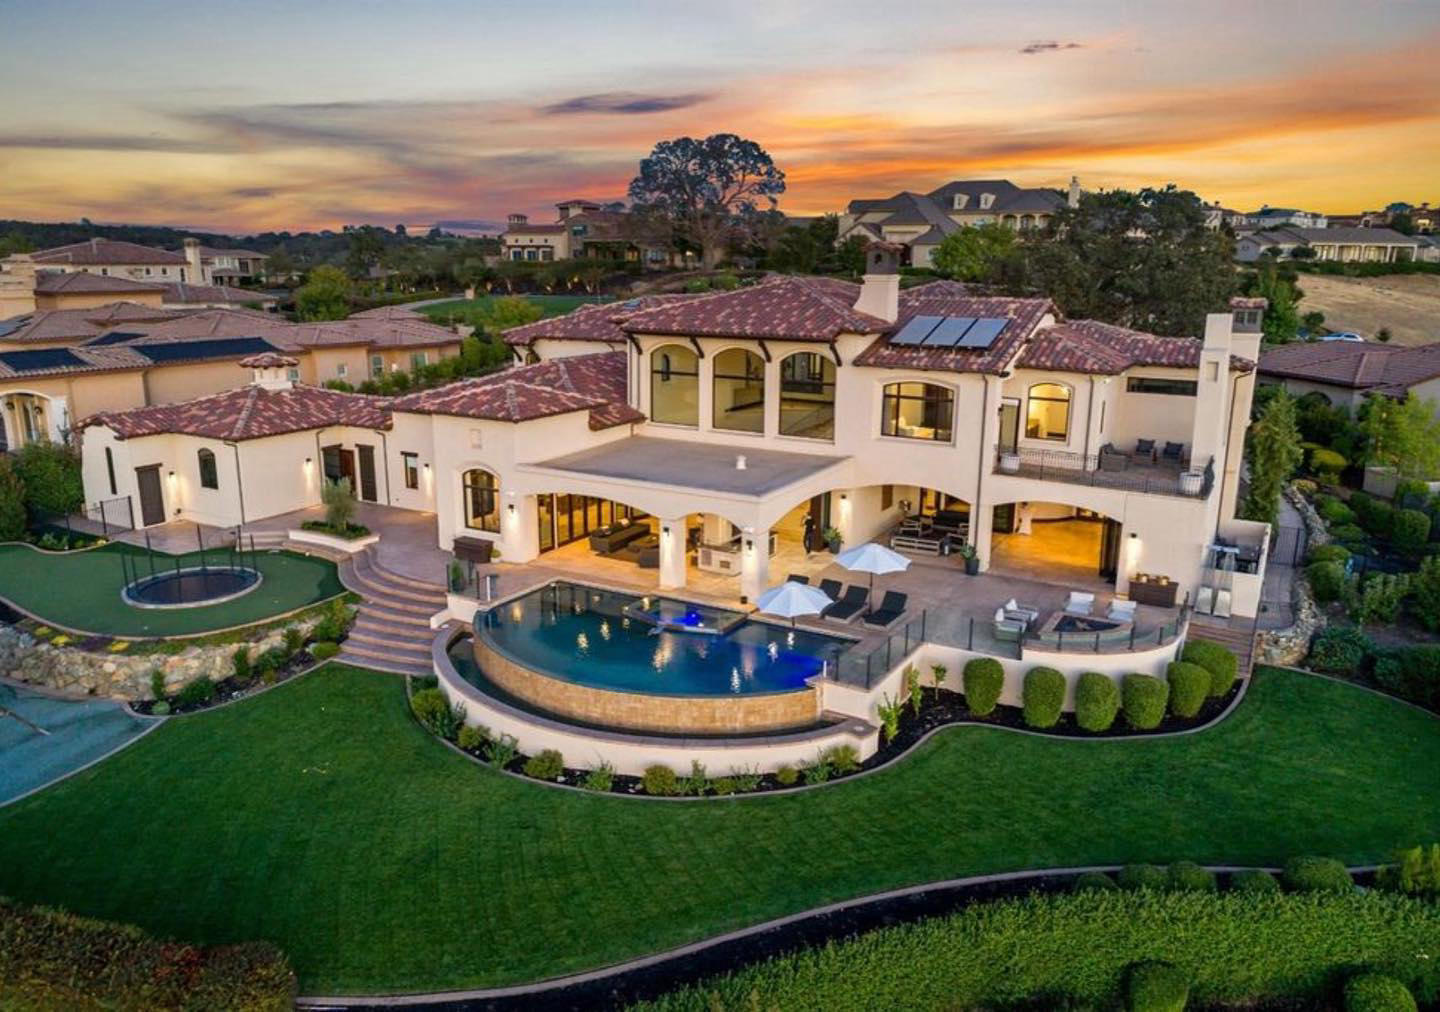 Another spectacular property on the market in my hometown of El Dorado Hills